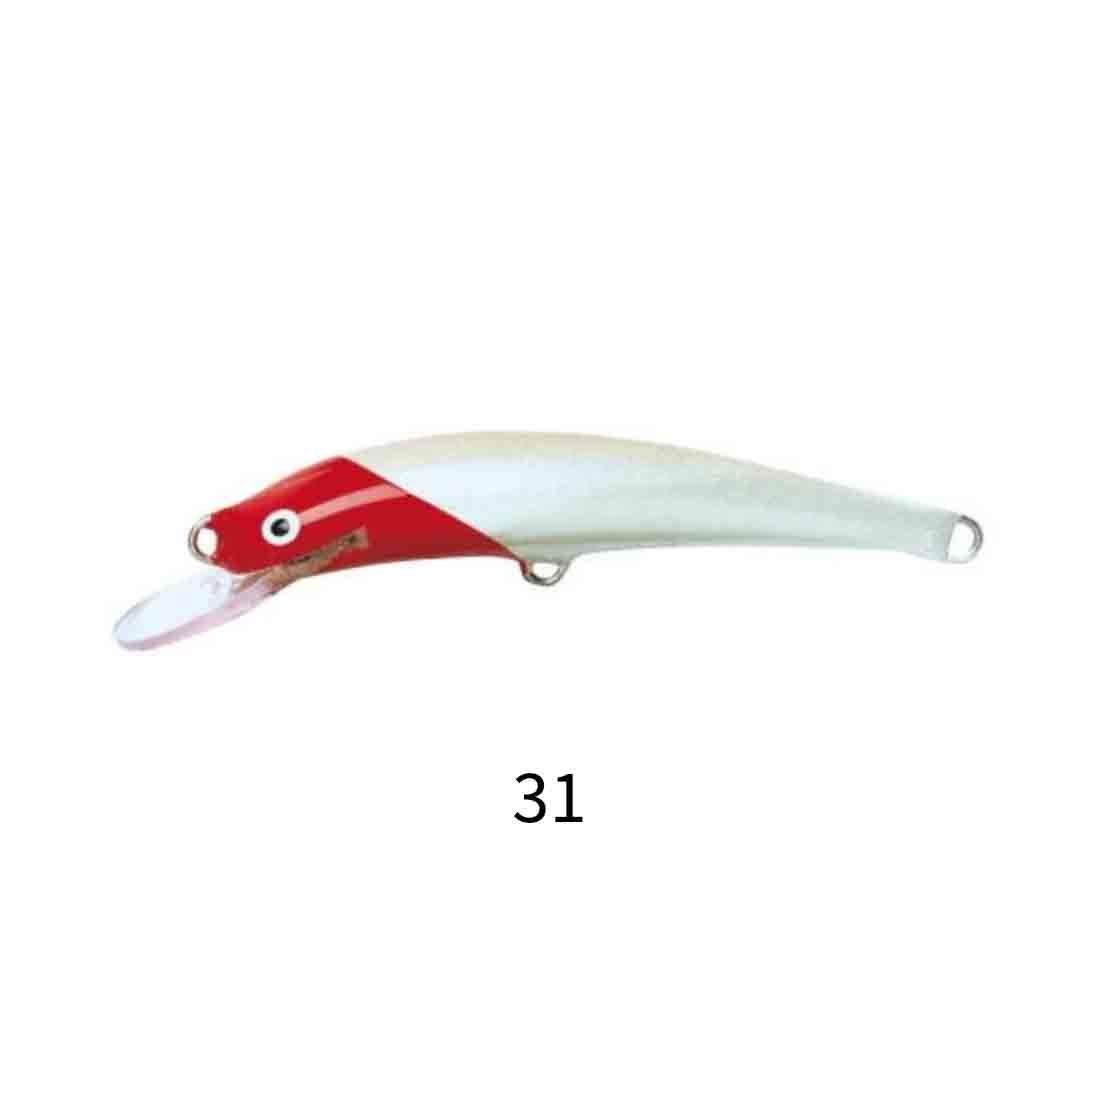 Nils Master Invincible-DR 12cm 24g  Hard Body And Metal Lures for sale in  Pialba, Hervey Bay